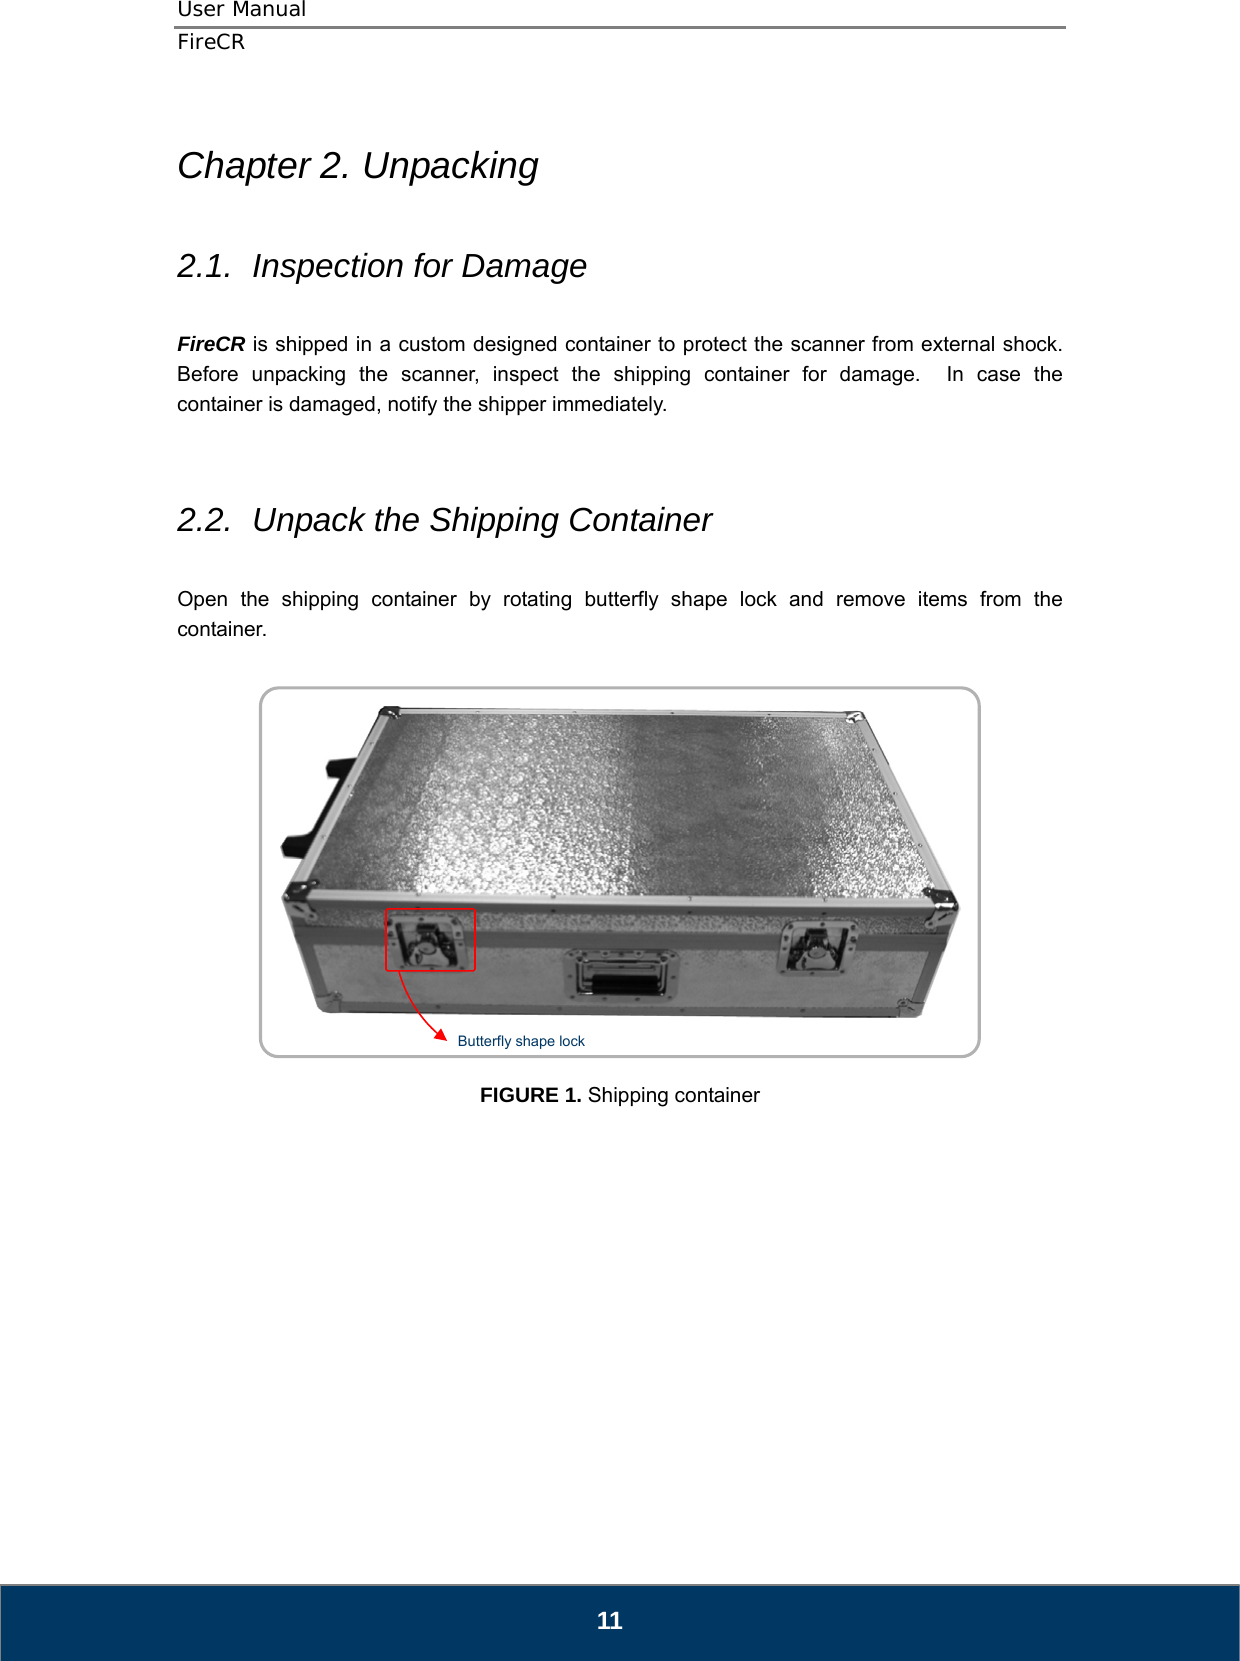 User Manual  FireCR  Chapter 2. Unpacking  2.1.  Inspection for Damage  FireCR is shipped in a custom designed container to protect the scanner from external shock.   Before unpacking the scanner, inspect the shipping container for damage.  In case the container is damaged, notify the shipper immediately.       2.2.  Unpack the Shipping Container  Open the shipping container by rotating butterfly shape lock and remove items from the container.    Butterfly shape lock   FIGURE 1. Shipping container               11 